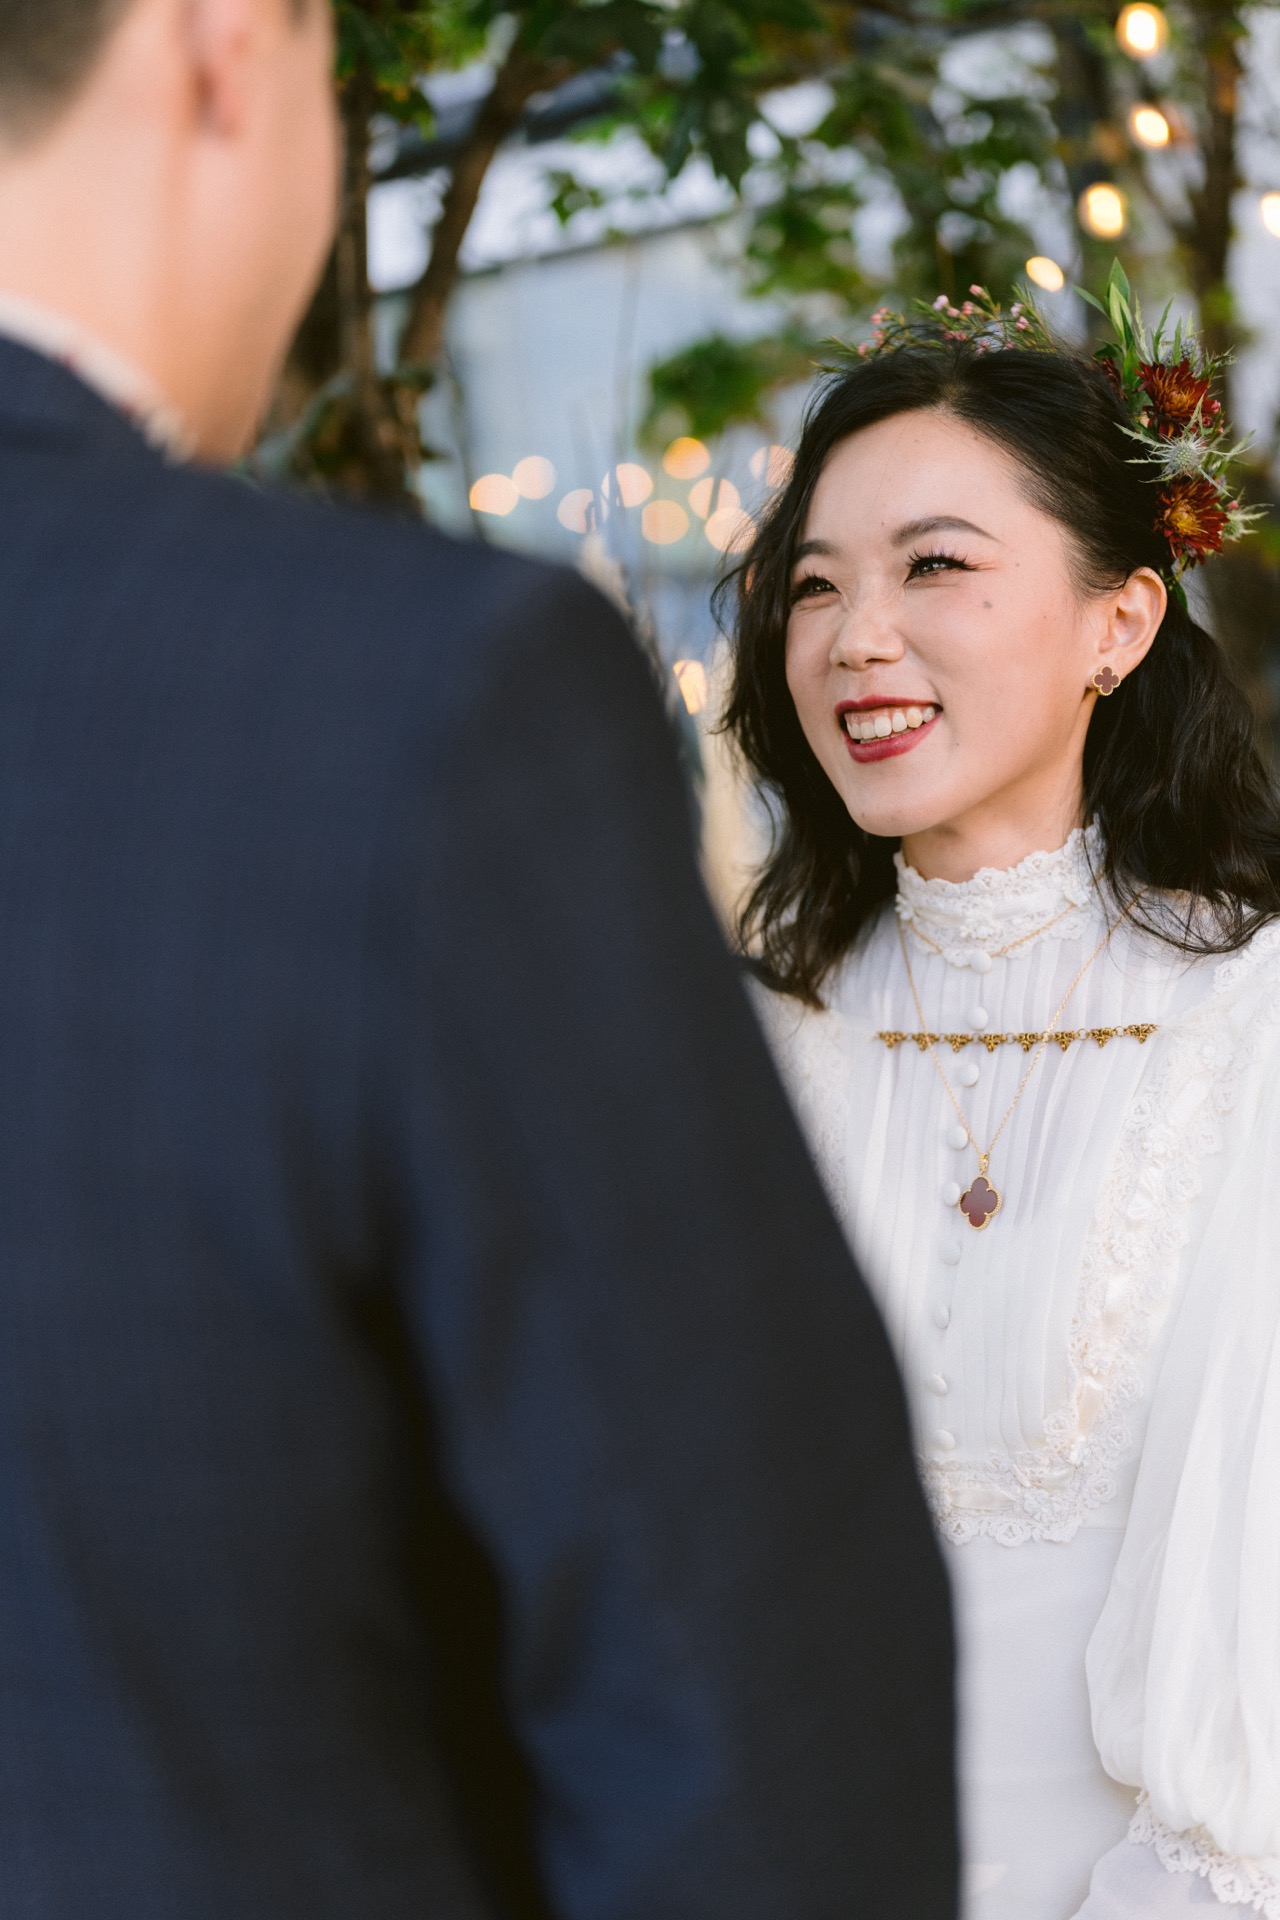 Bride saying "Yes, I do" in front of guests at a micro-wedding.